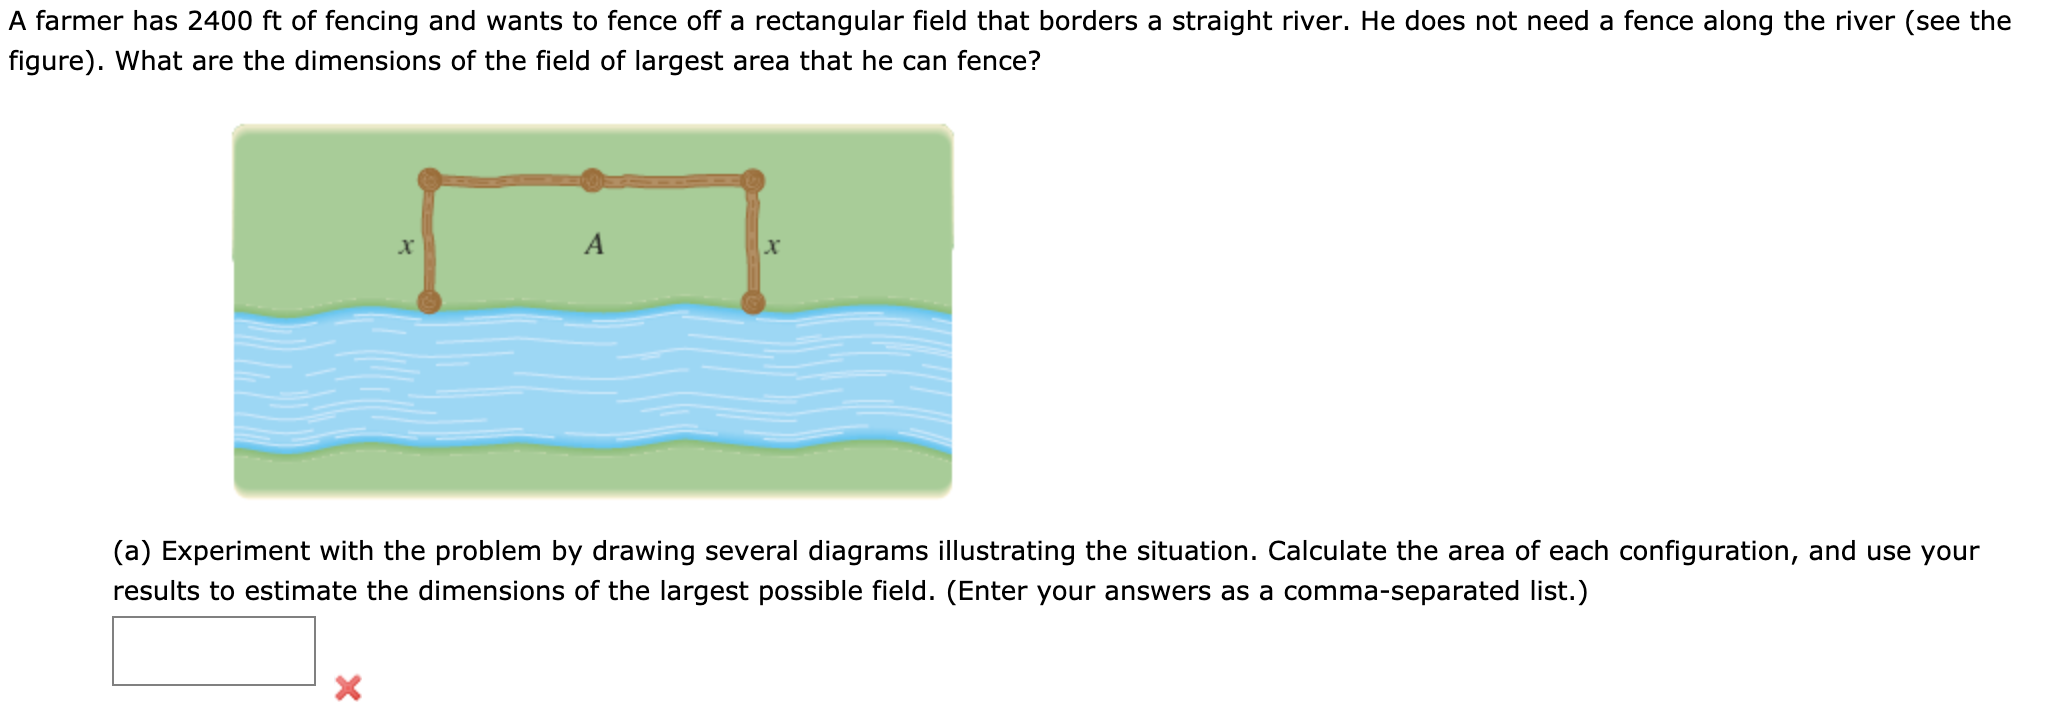 A farmer has 2400 ft of fencing and wants to fence off a rectangular field that borders a straight river. He does not need a fence along the river (see the
figure). What are the dimensions of the field of largest area that he can fence?
A
(a) Experiment with the problem by drawing several diagrams illustrating the situation. Calculate the area of each configuration, and use your
results to estimate the dimensions of the largest possible field. (Enter your answers as a comma-separated list.)
